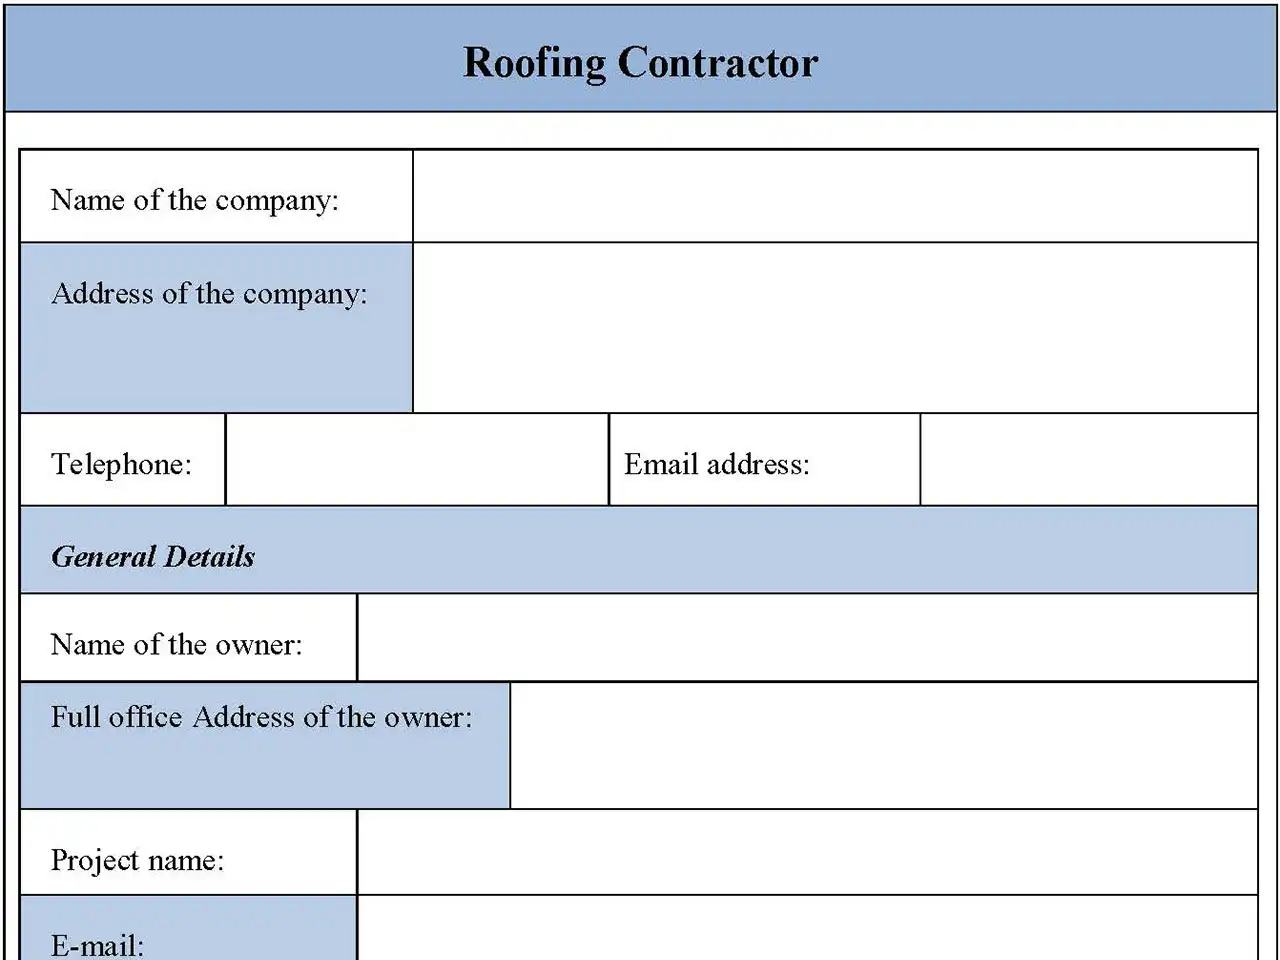 Roofing Contractor Form